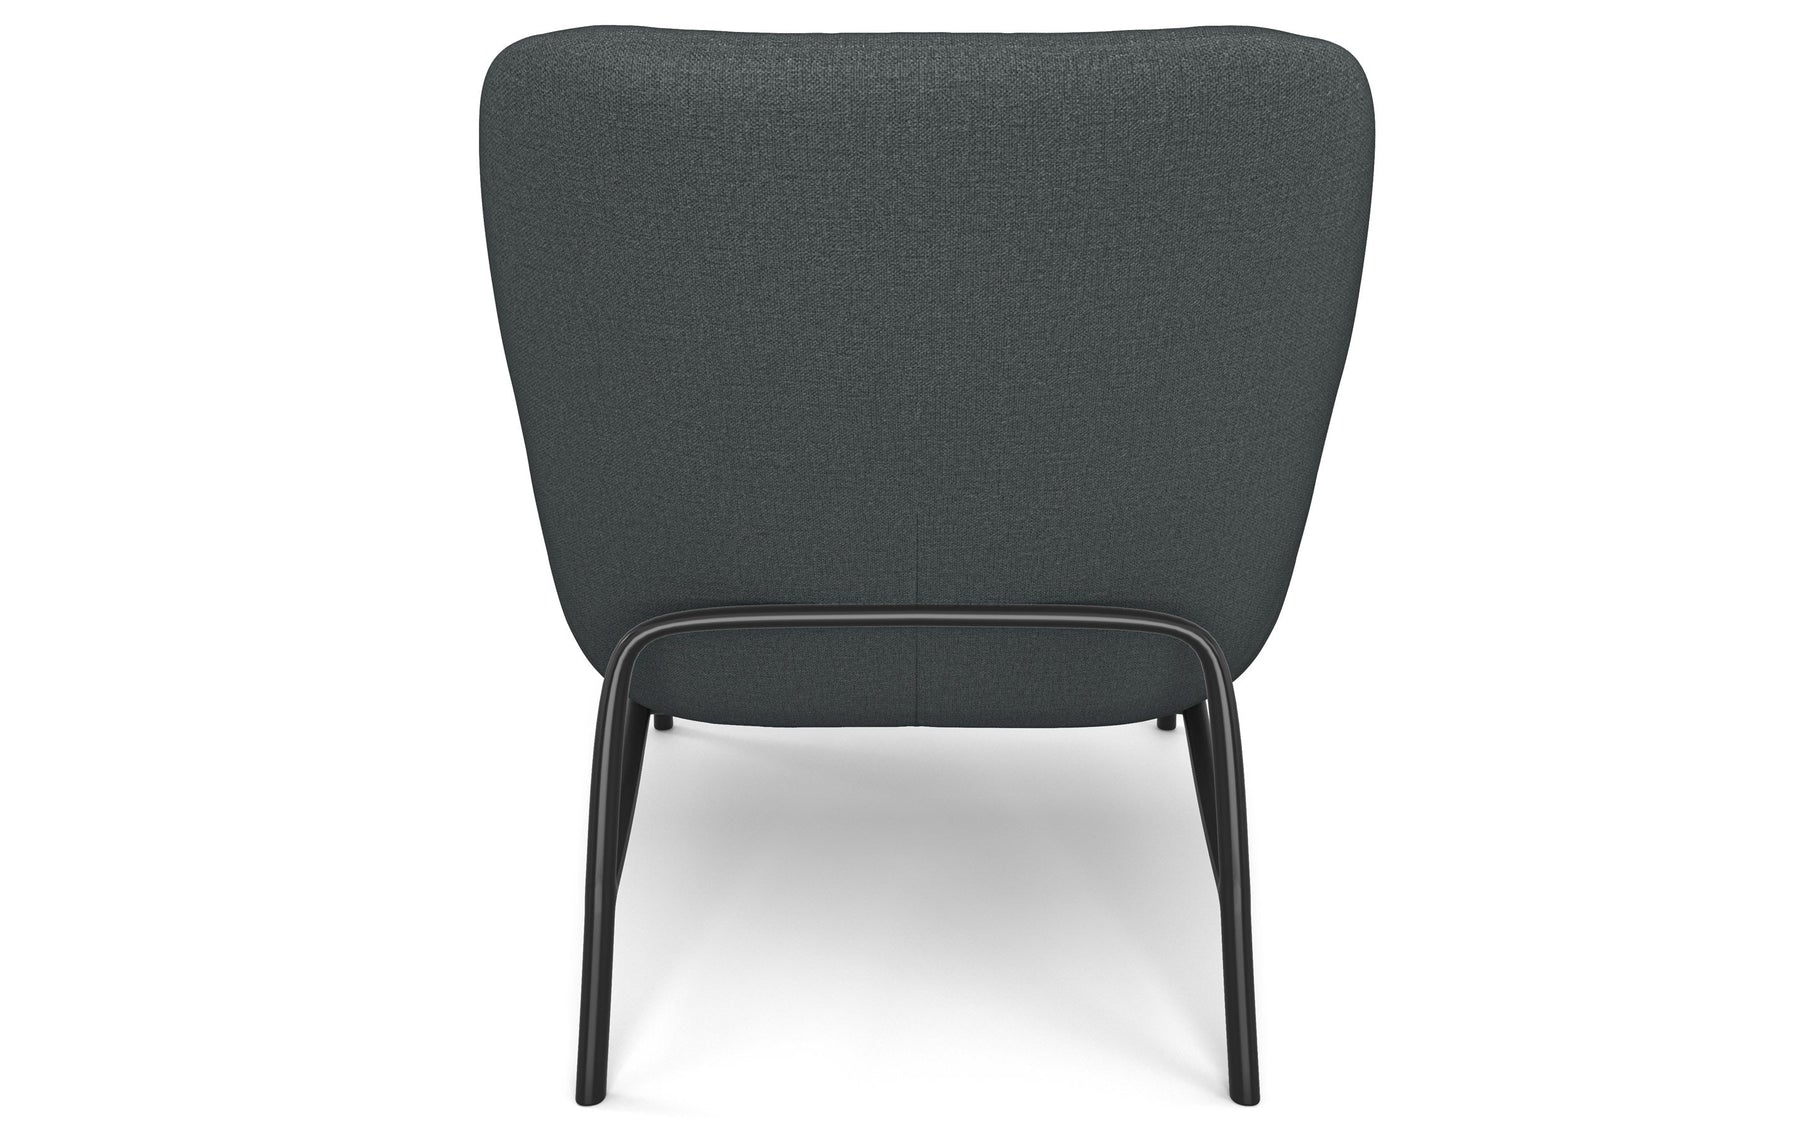 Steel Grey Woven Fabric | Elmont Accent Chair